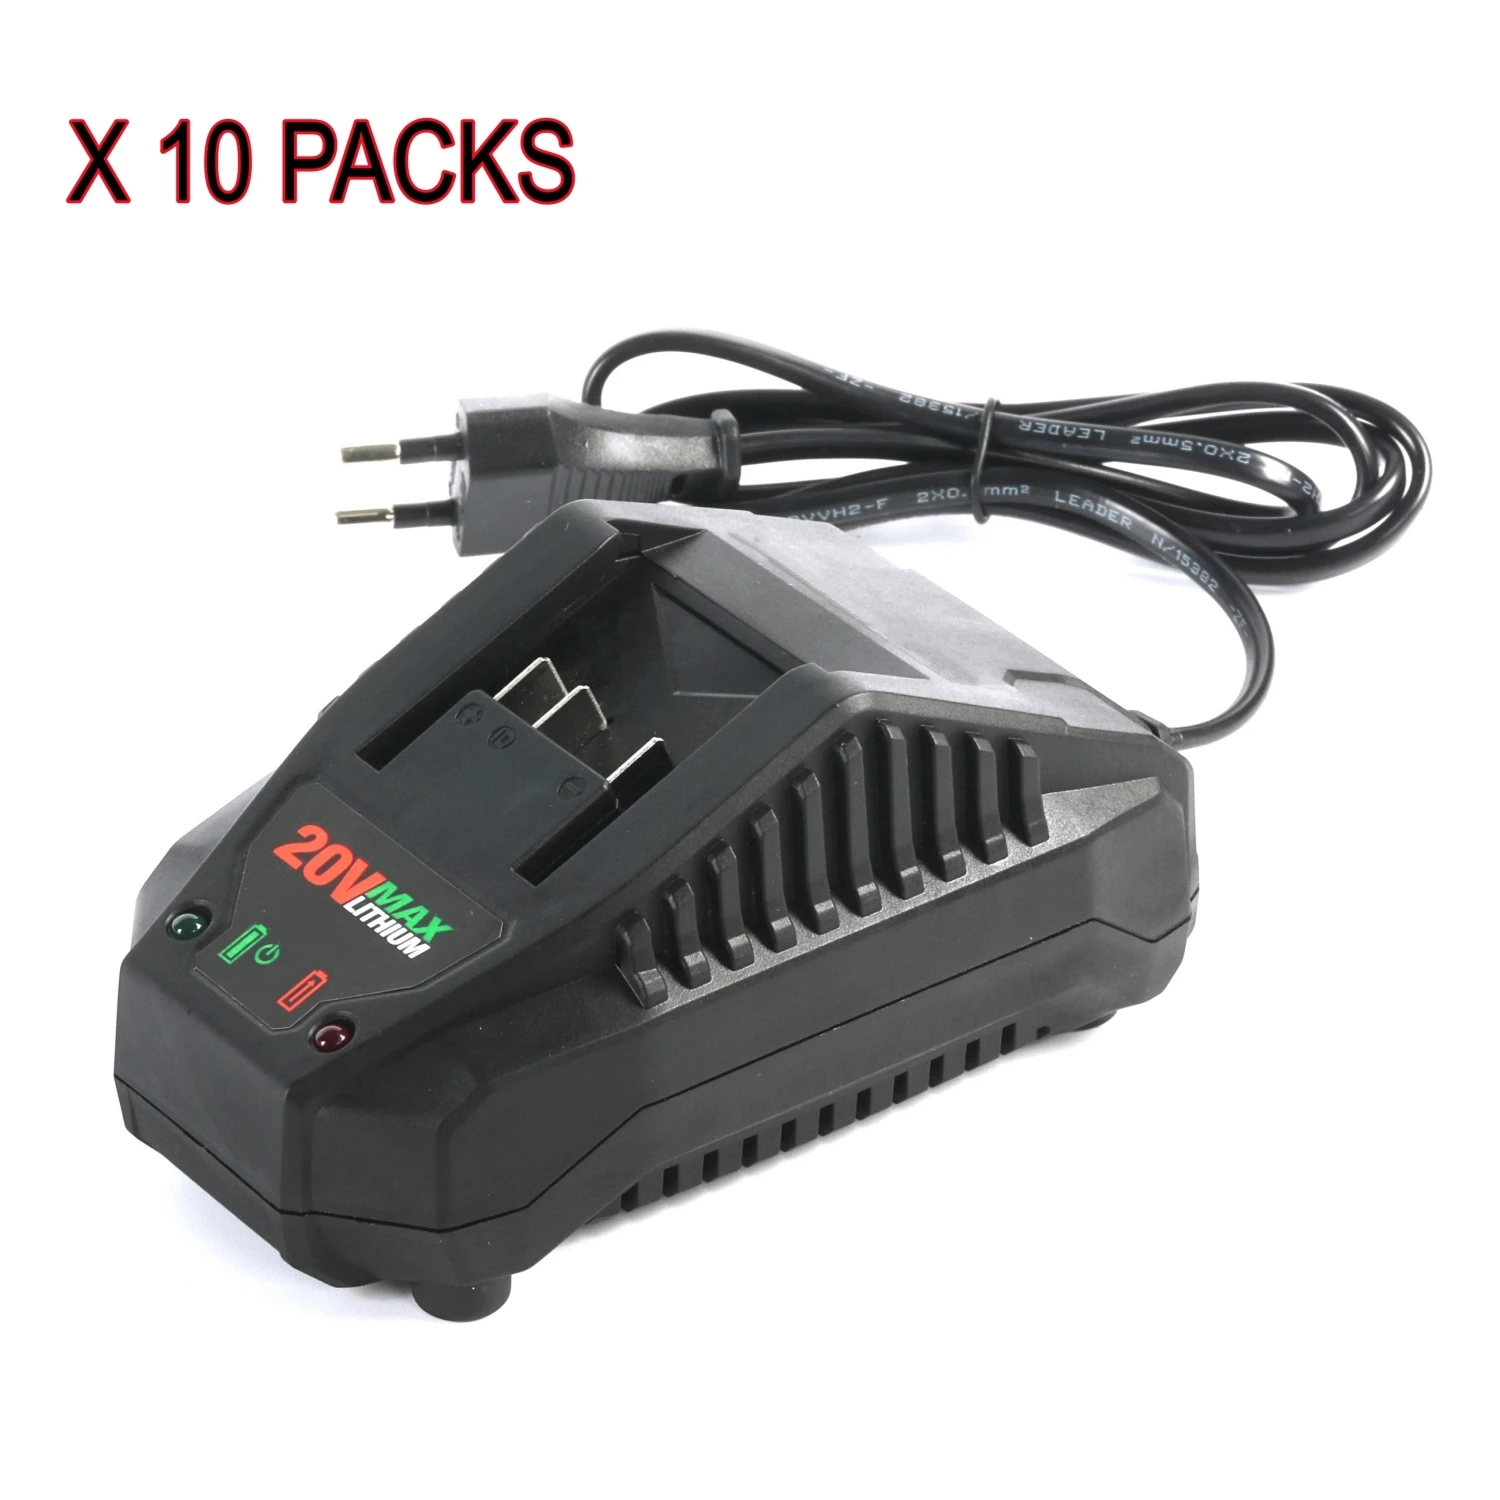 Parkside 20V 2.4A Battery Charger for 2Ah 4Ah 8Ah X20V Team Series Cordless  Tool